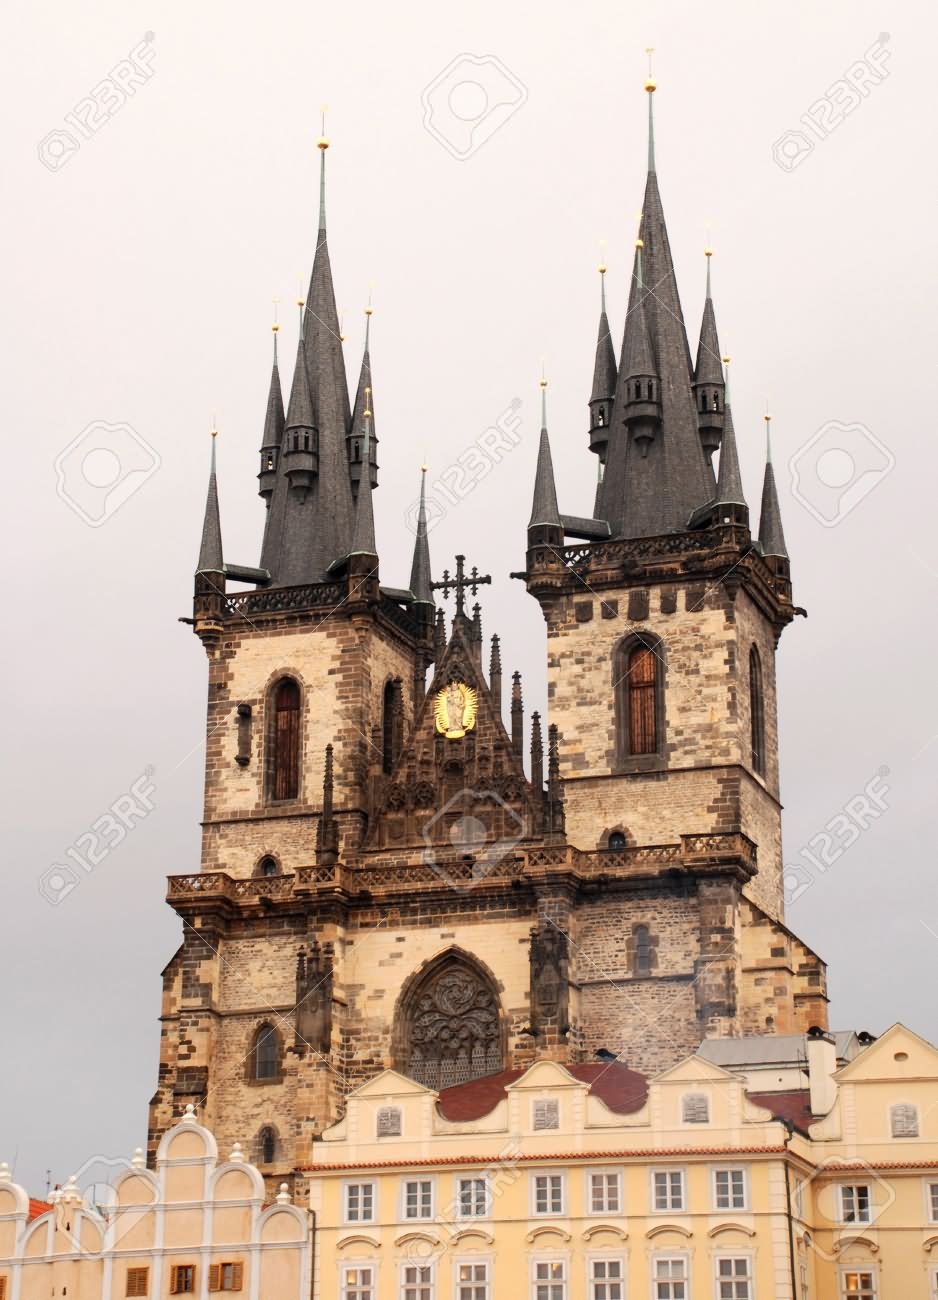 Twin Towers Of The Famous Gothic Church of Our Lady Before Týn